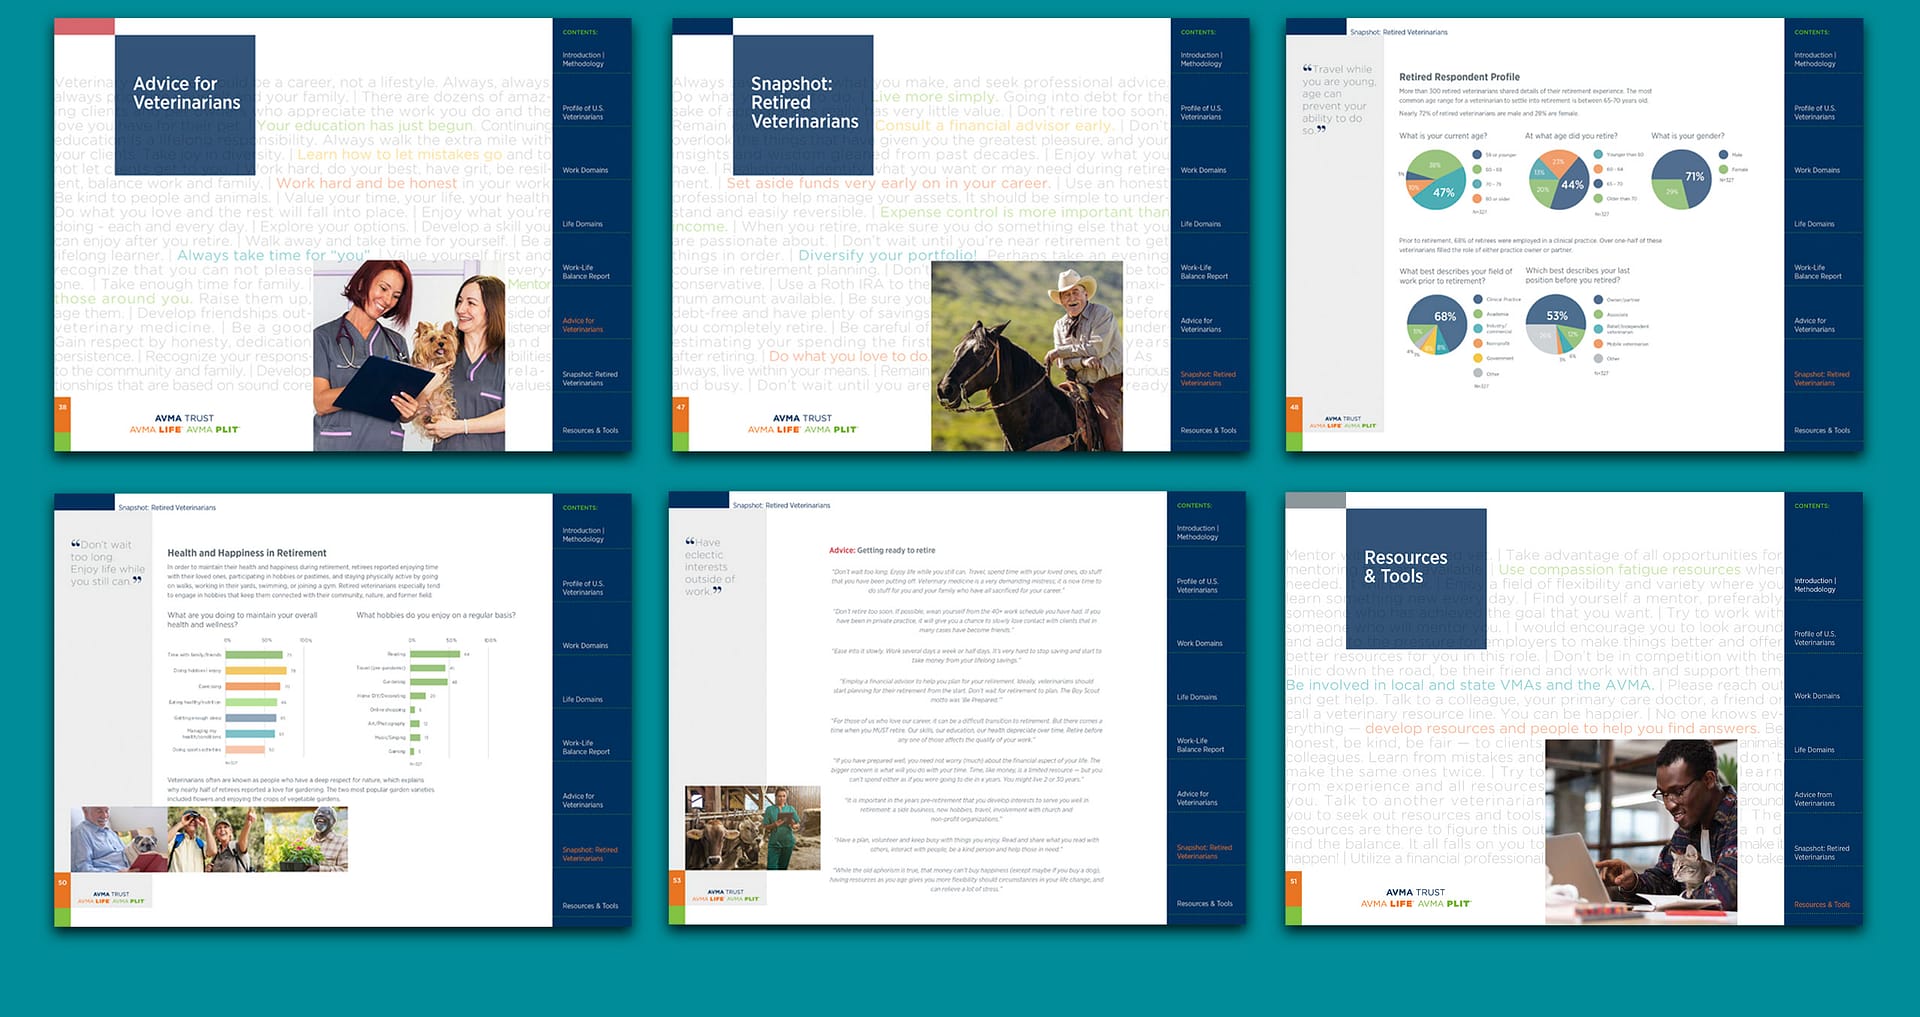 avma_report-pages_3